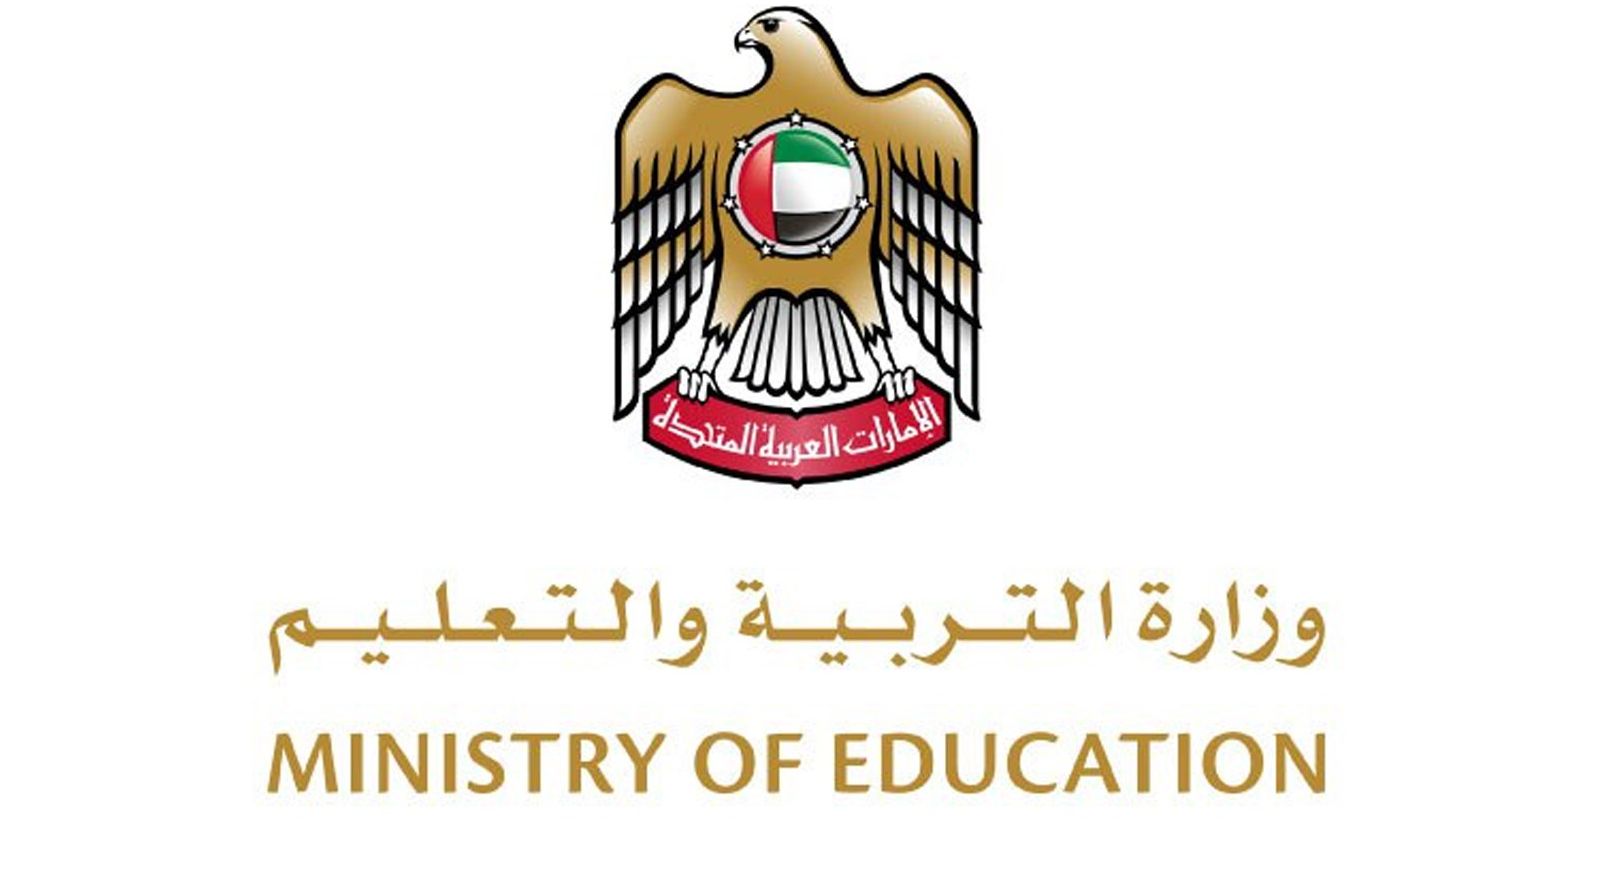 Uae Students Resume Distance Learning